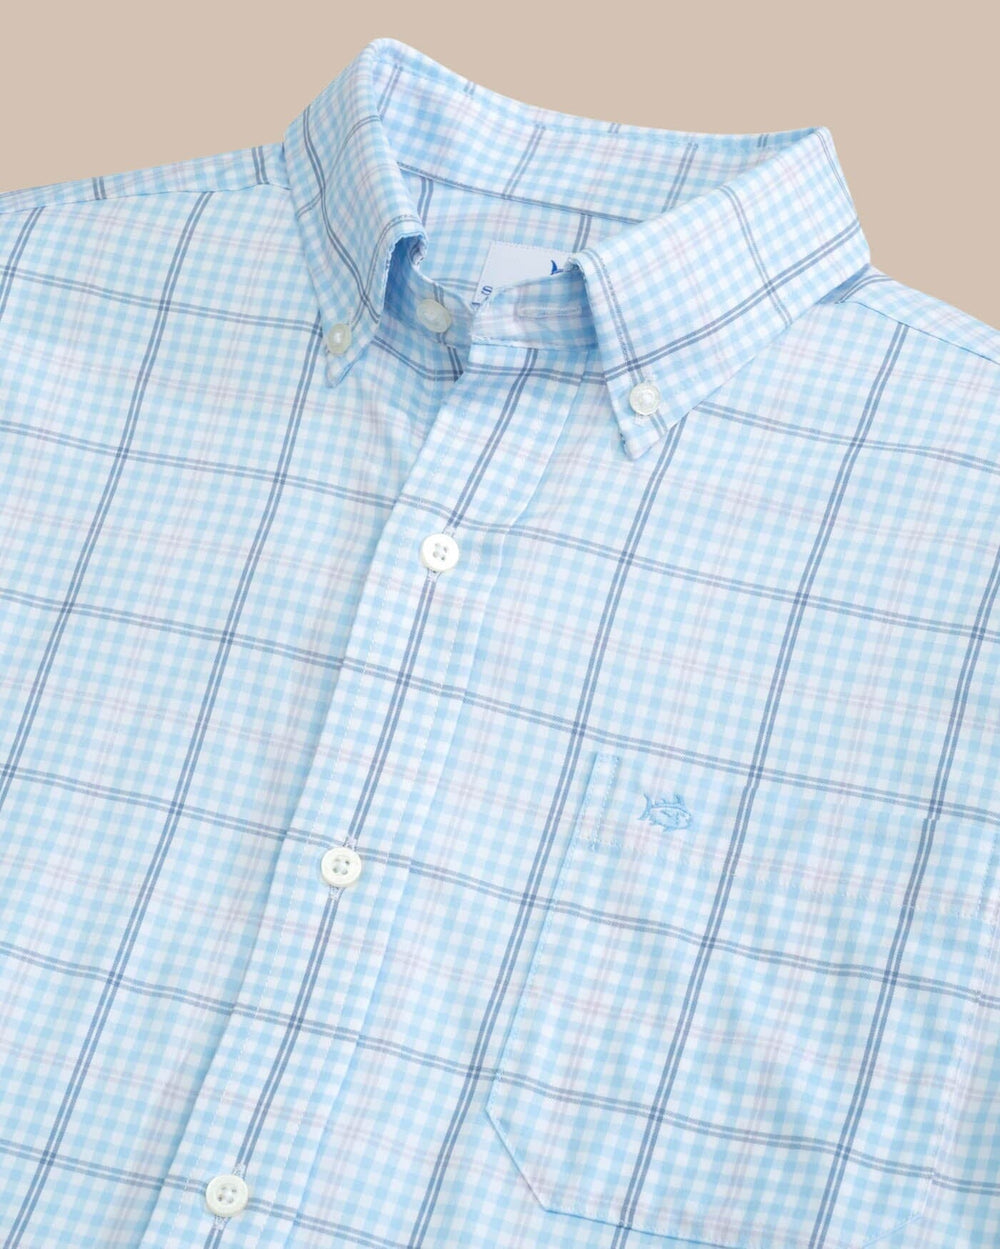 The detail view of the Southern Tide brrr Intercoastal Rainer Check Long Sleeve Sportshirt by Southern Tide - Clearwater Blue